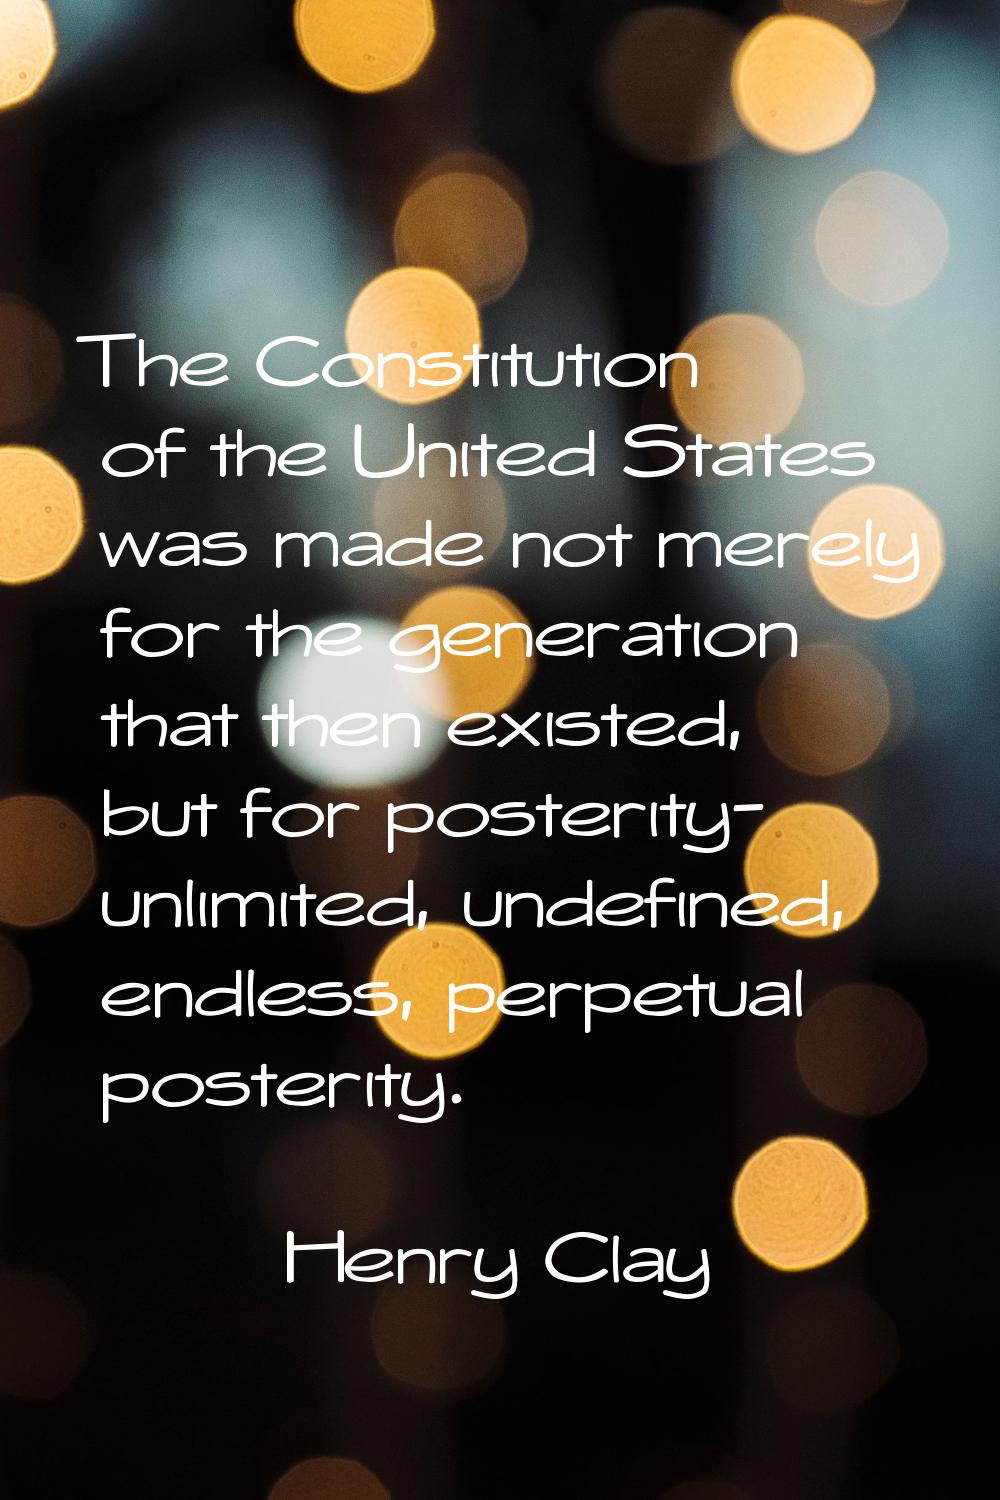 The Constitution of the United States was made not merely for the generation that then existed, but